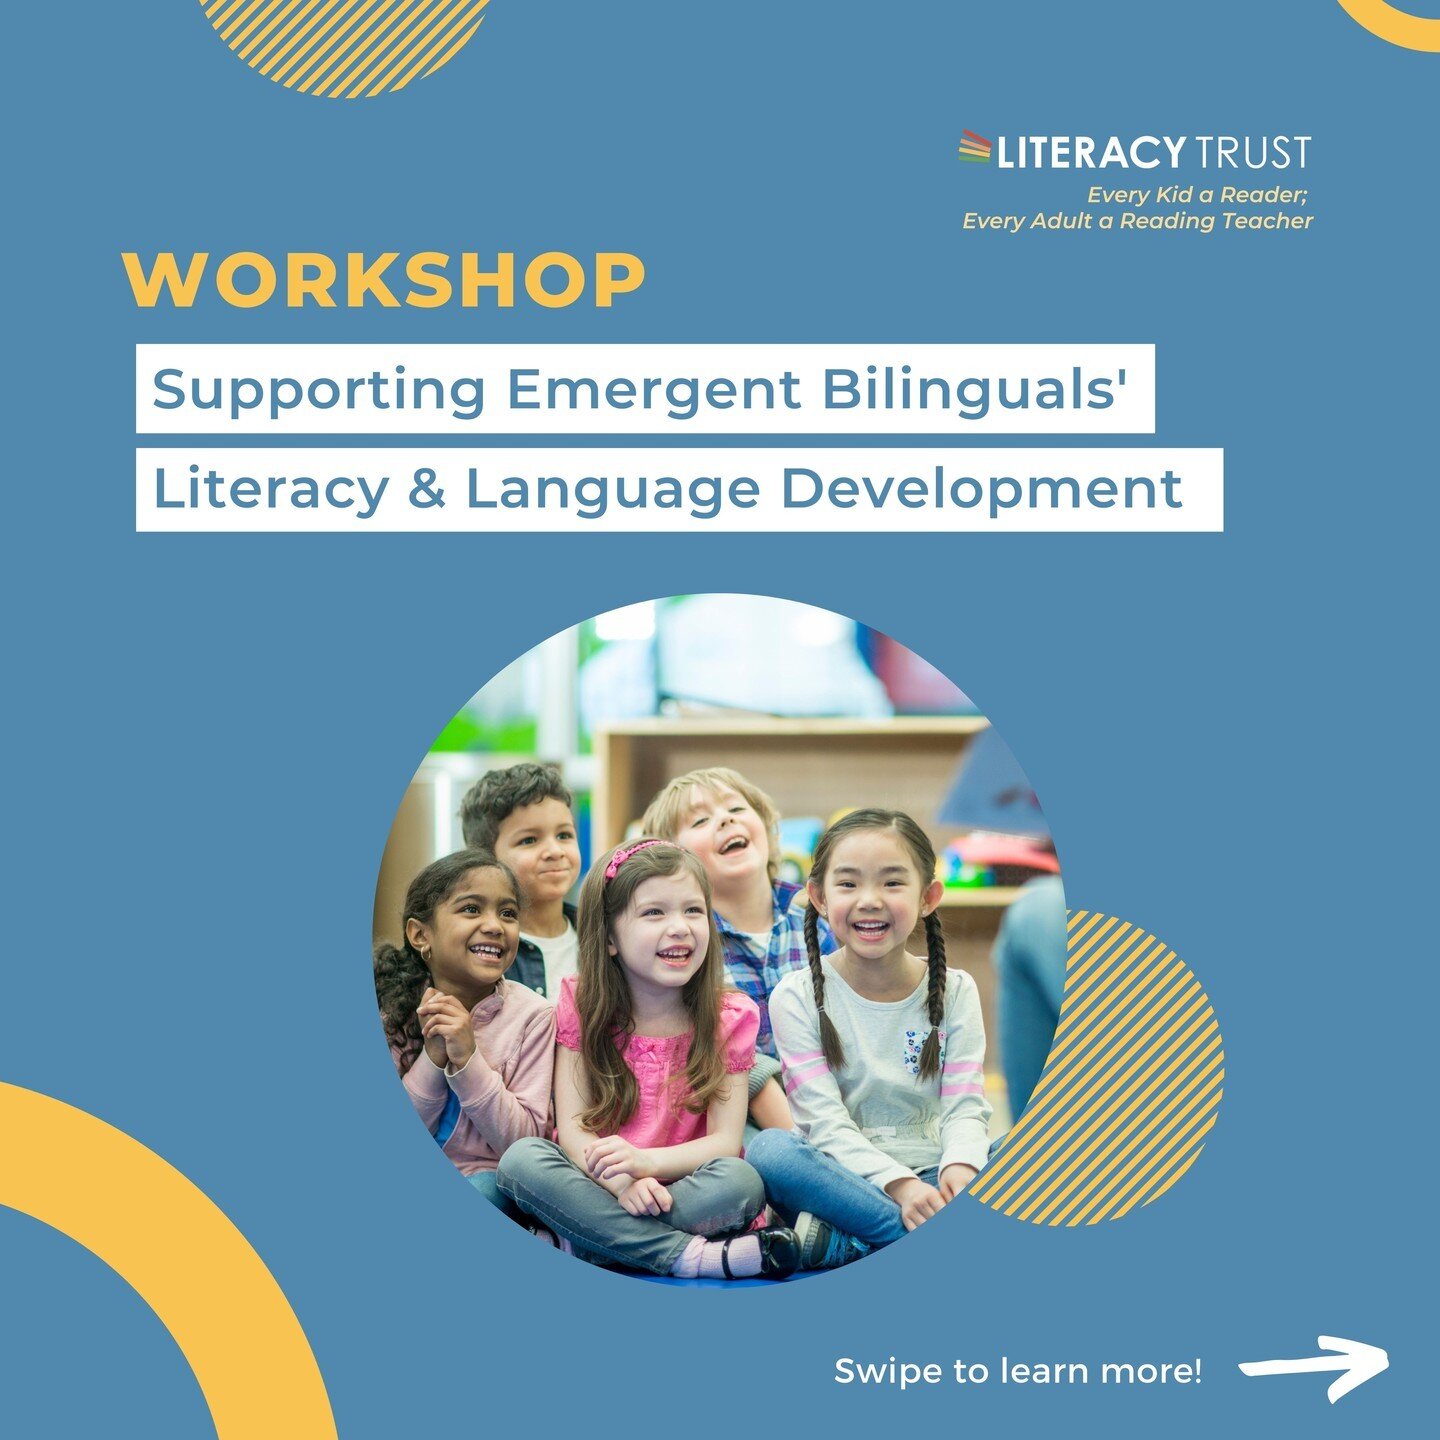 Join us for a live, interactive remote workshop on Supporting Emergent Bilinguals' Literacy &amp; Language Development. 📚 Attendees will learn about various assets of our multilingual learners and their stages of language acquisition. Register today